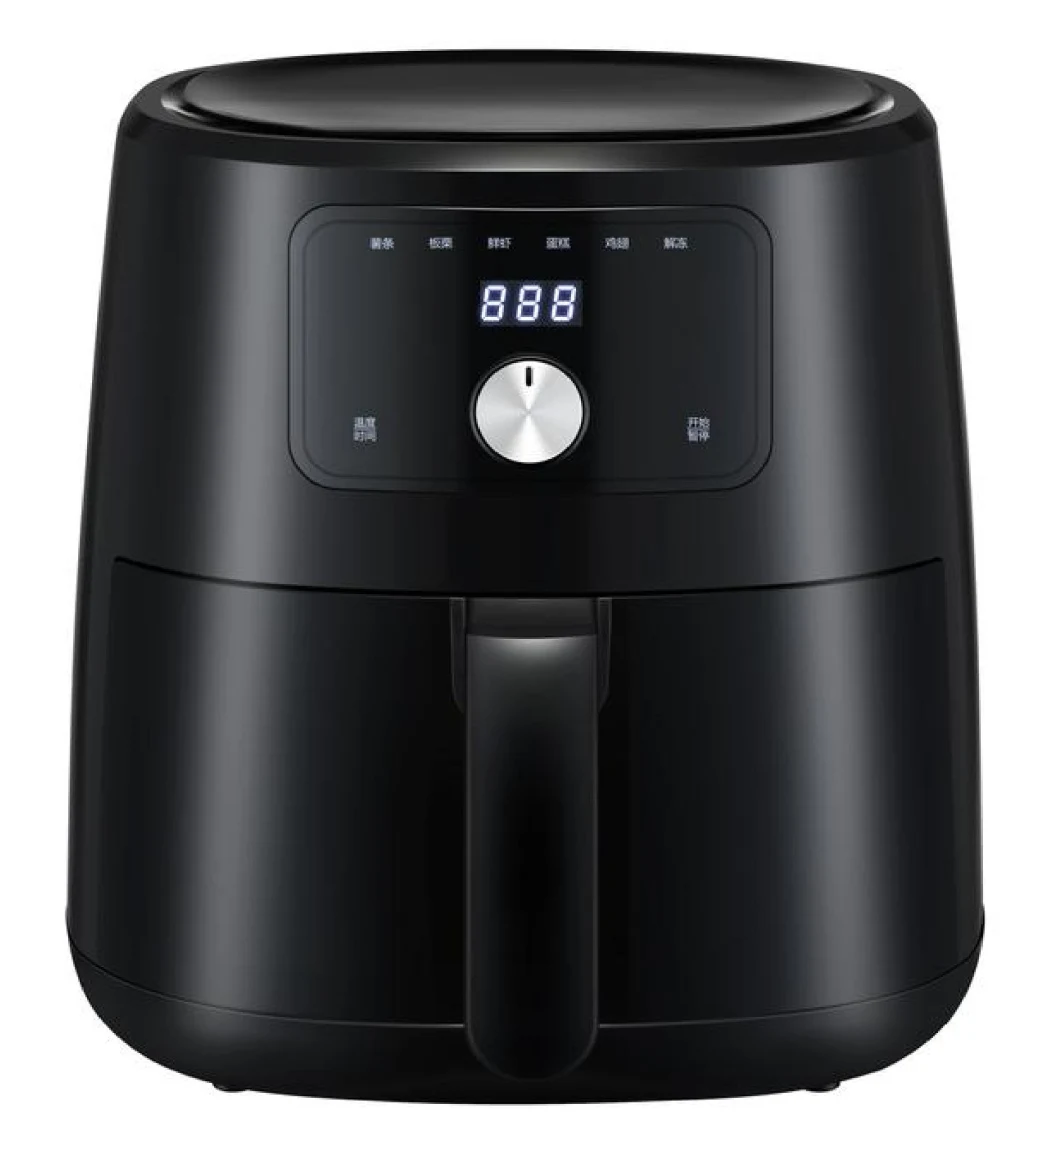 Professional Kitchen Appliance 5.5 Liter Big Electric Digital Touch Screen Oil Free Air Fryer